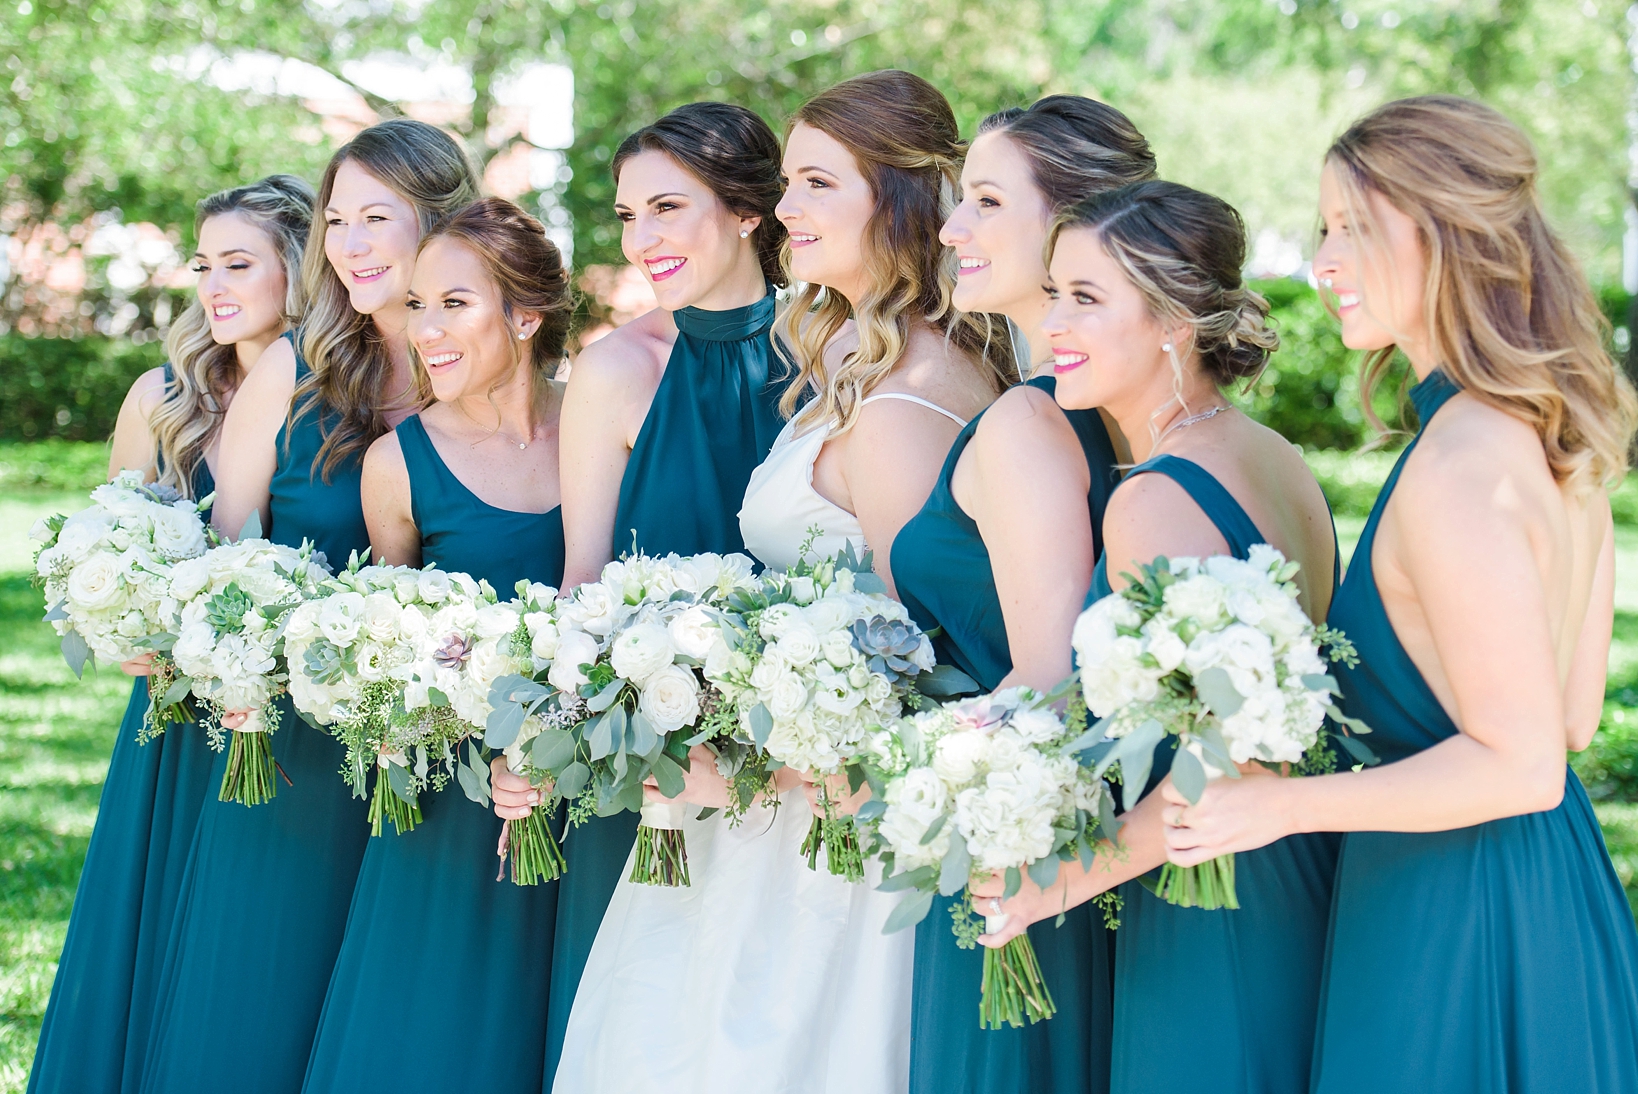 Bride with her bridesmaids wearing teal matching dresses